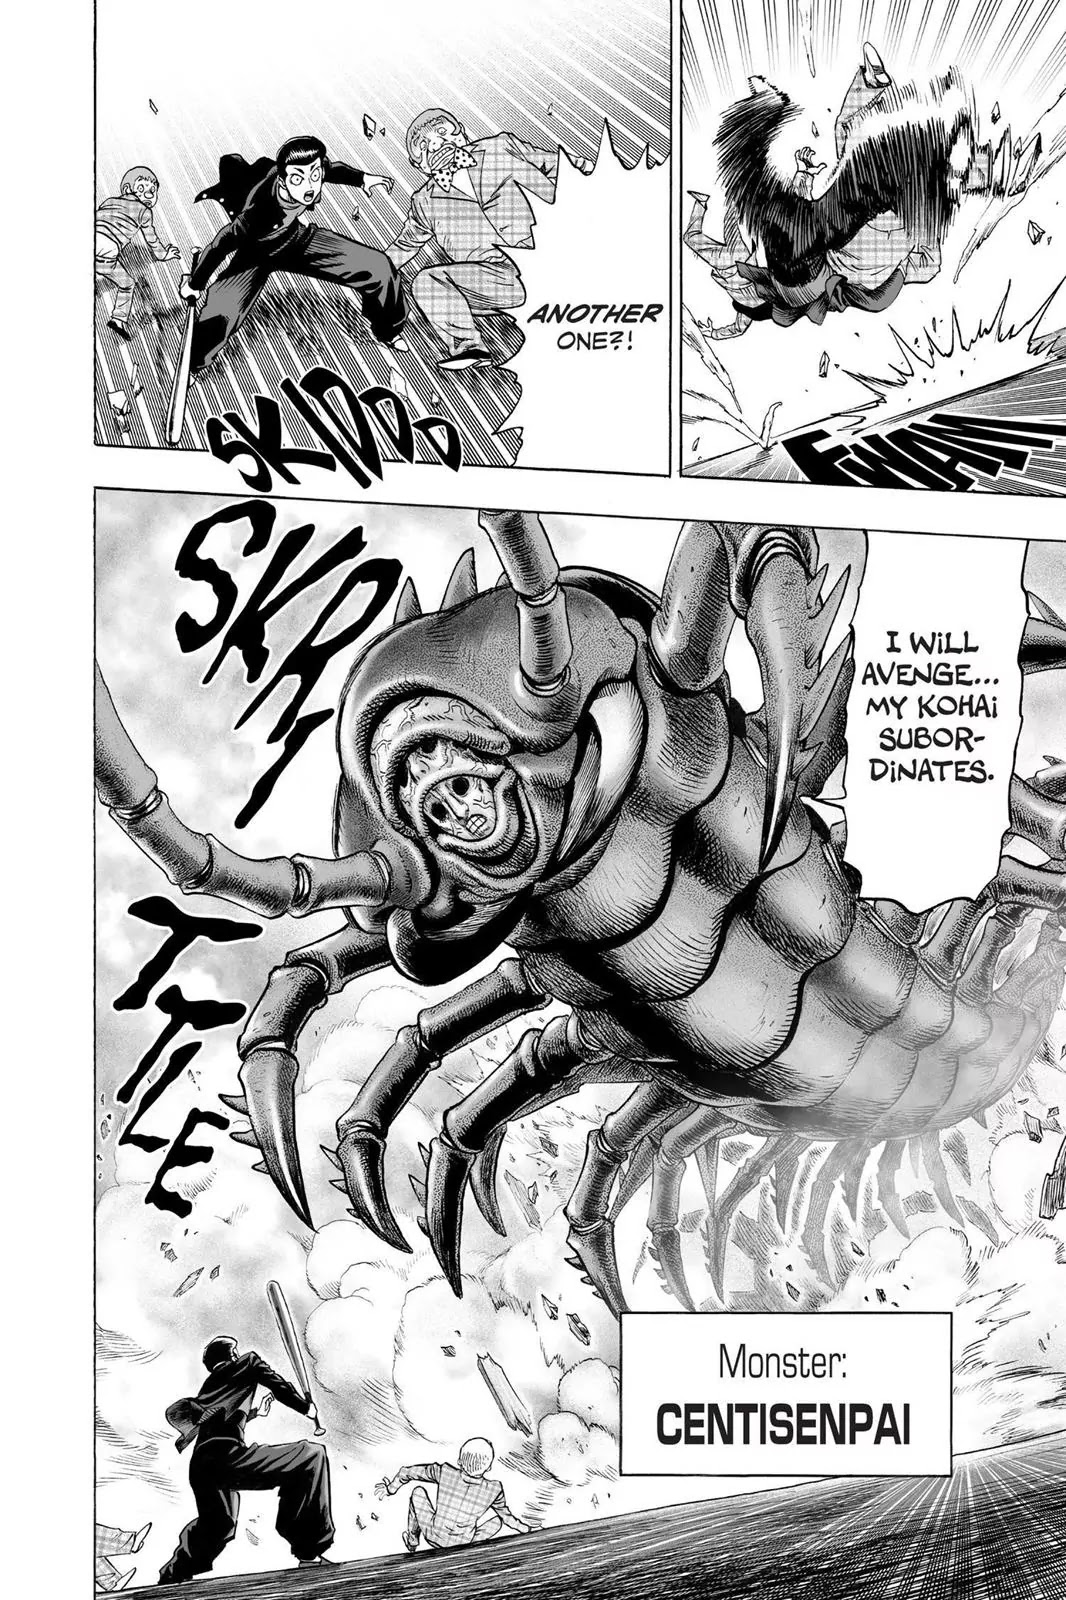 One Punch Man, Chapter 54 Centipede image 06